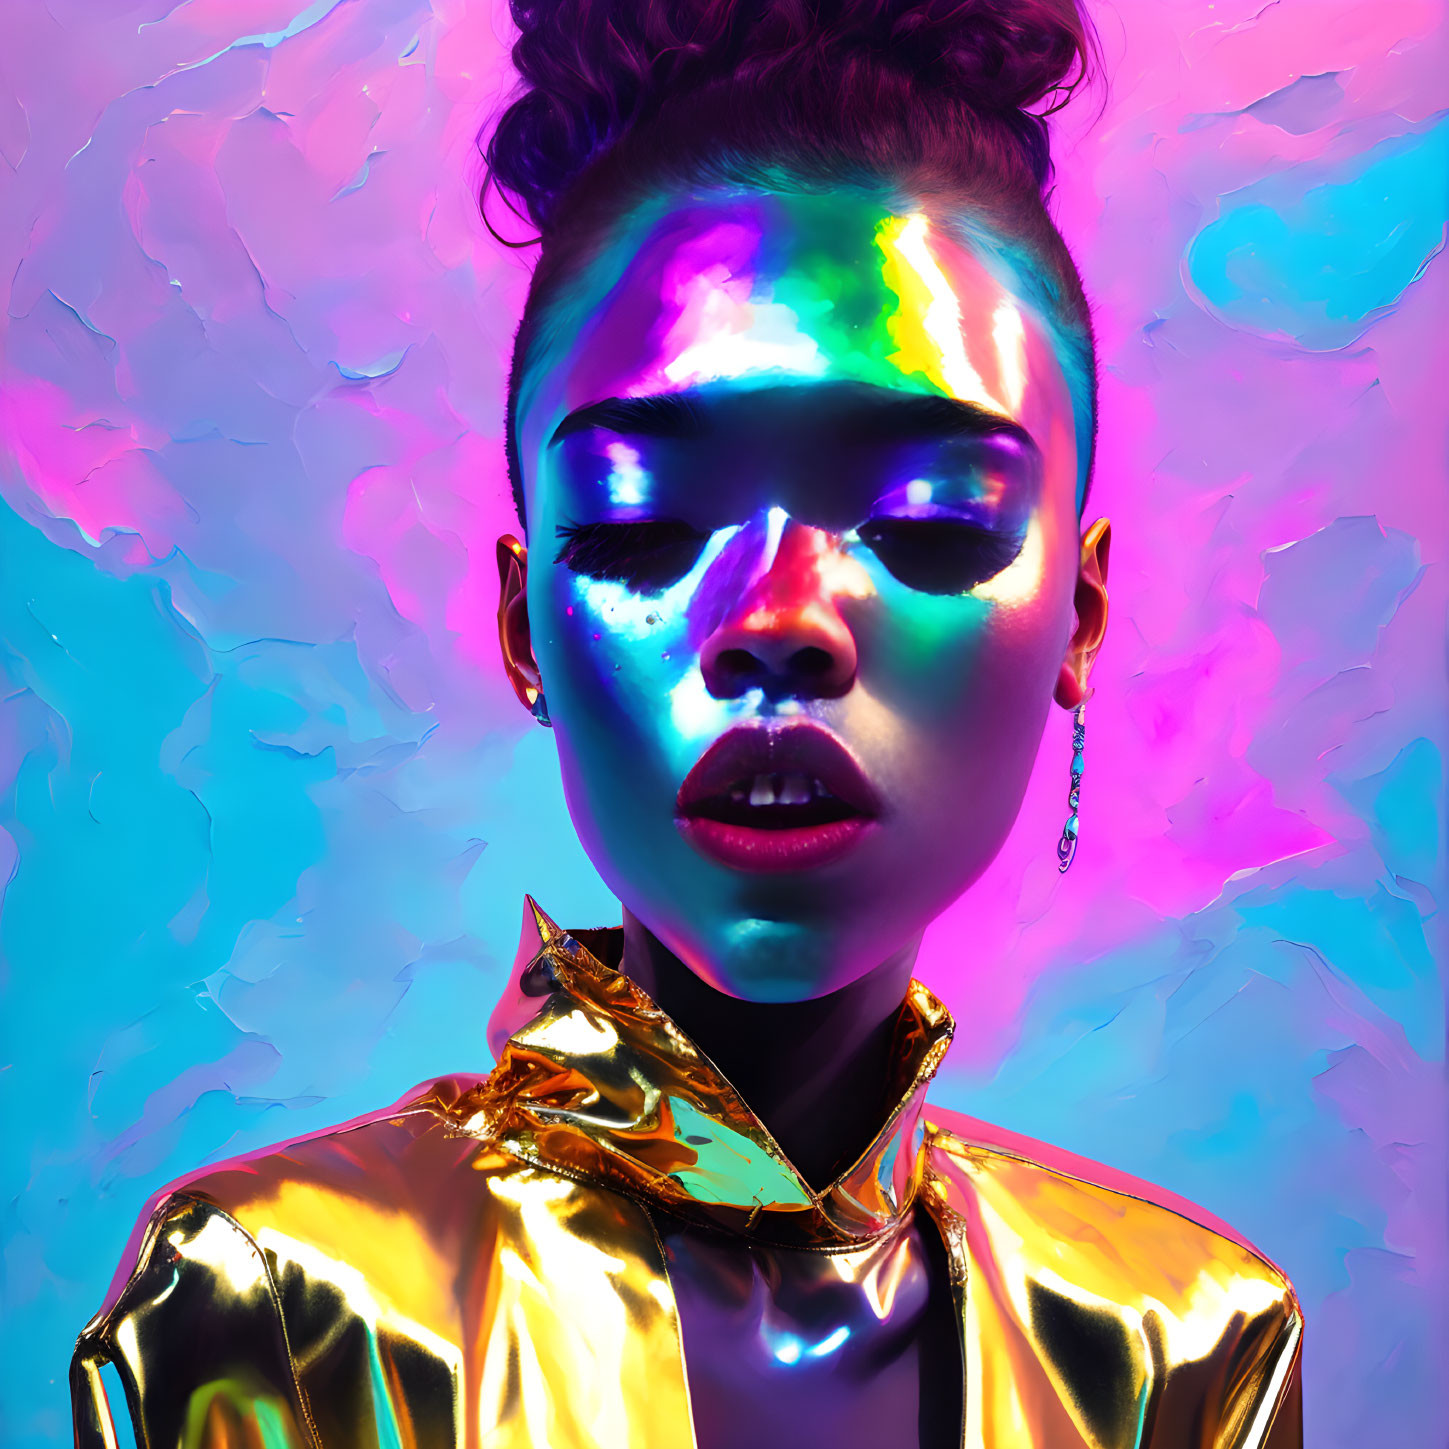 Vibrant neon makeup on woman in gold jacket against abstract background